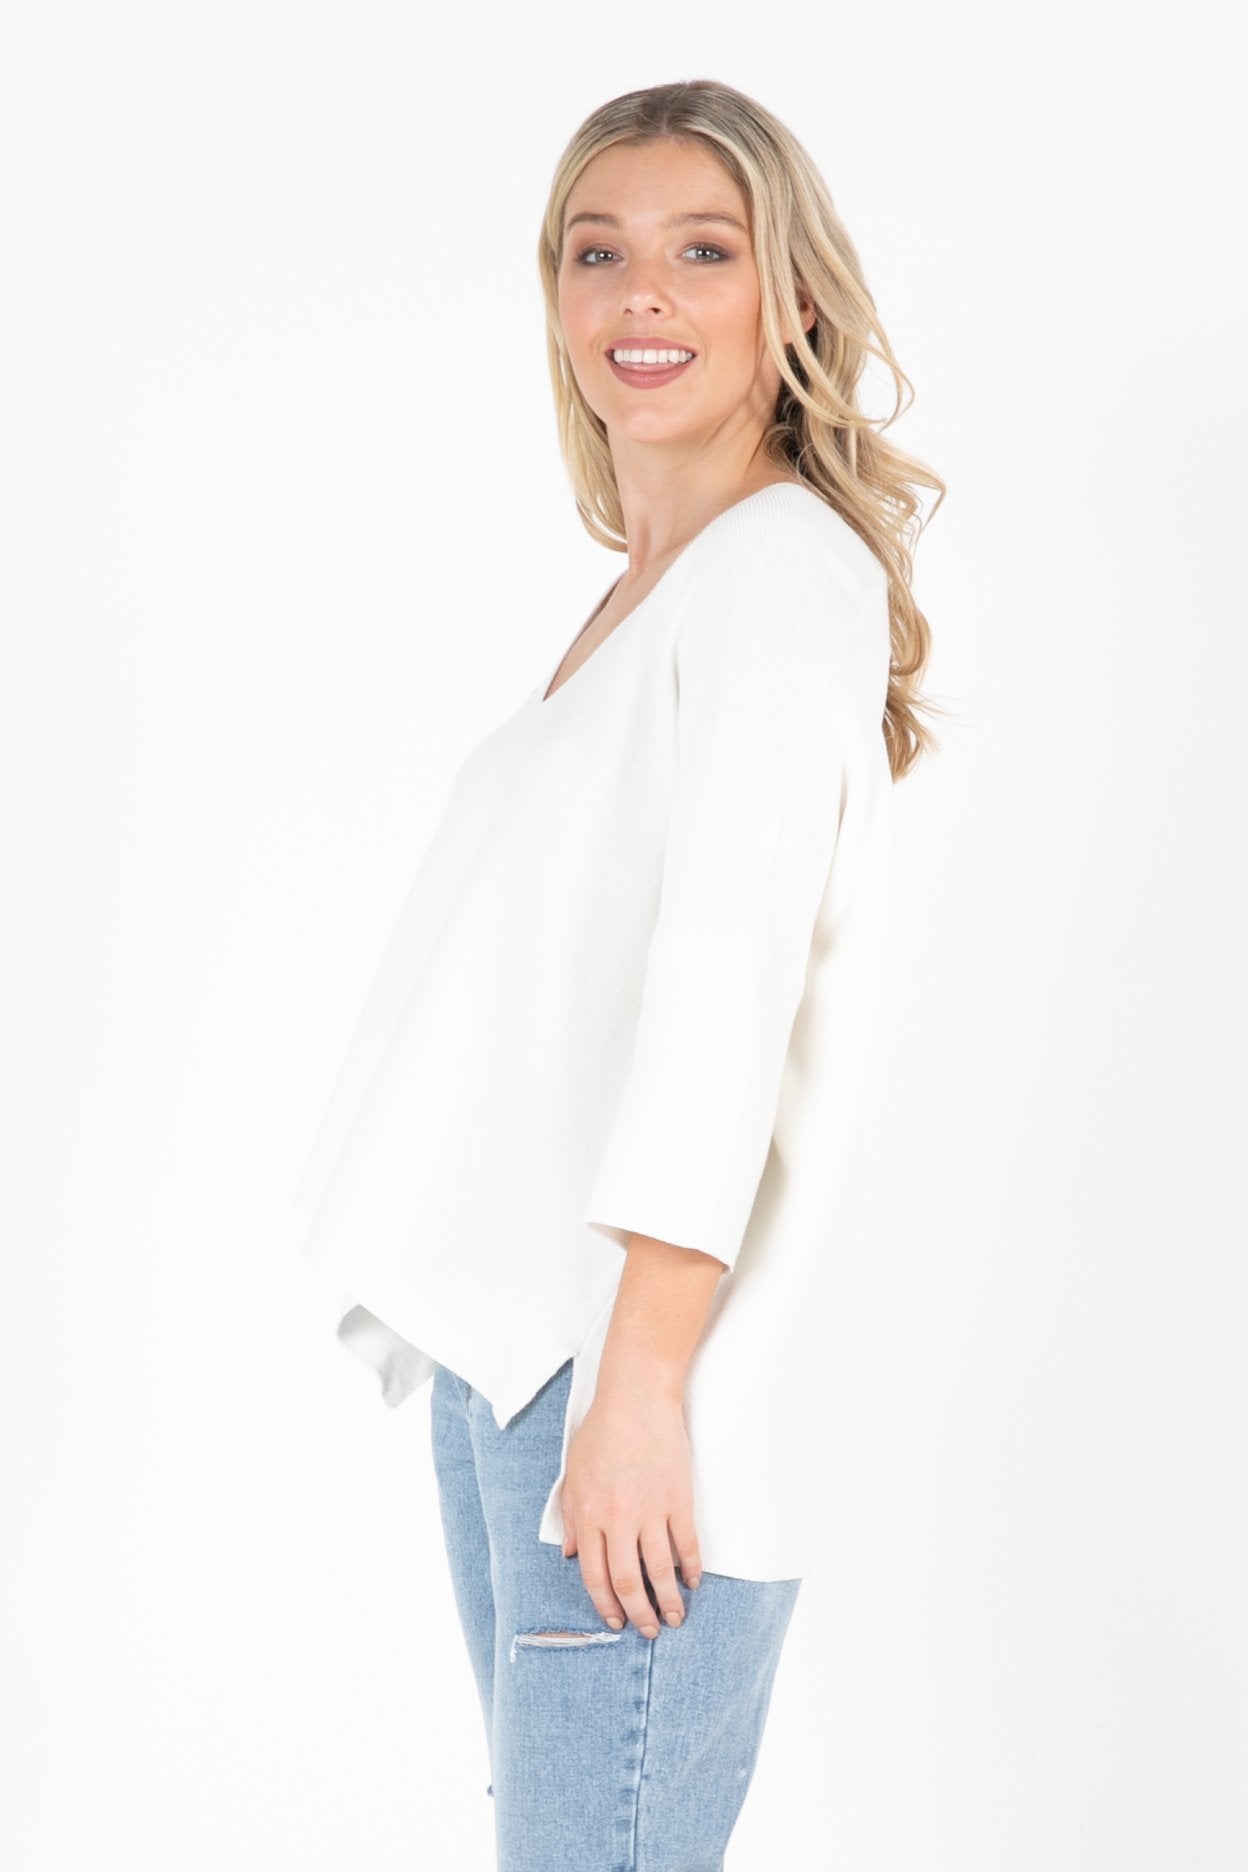 Sass Bodhi Baggy Knit in White - Hey Sara